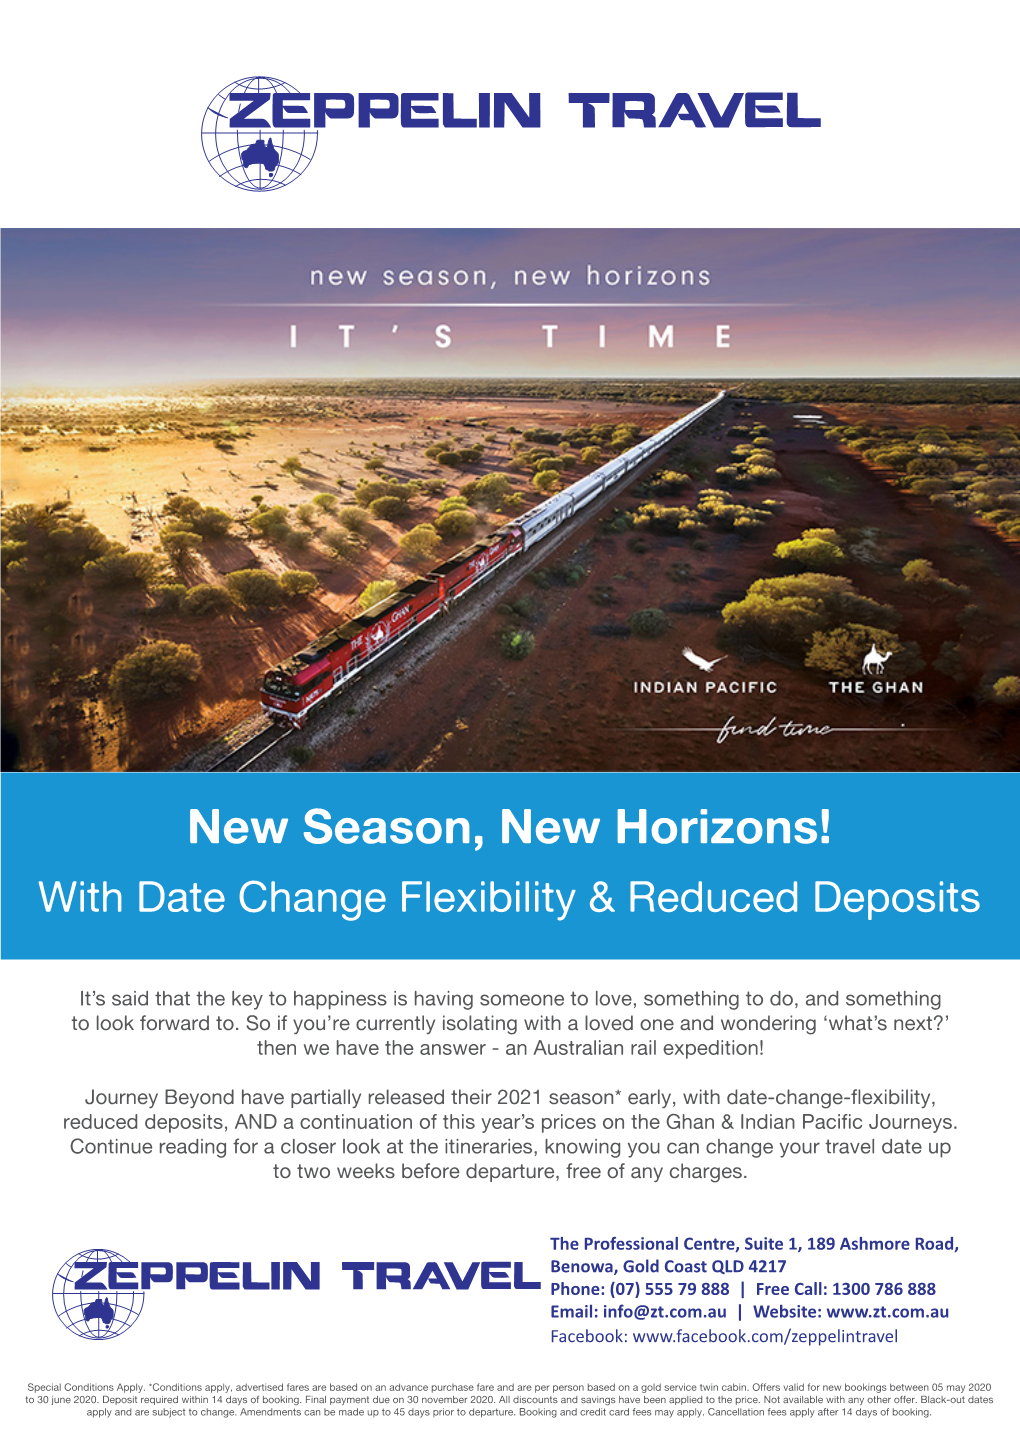 New Season, New Horizons! with Date Change Flexibility & Reduced Deposits